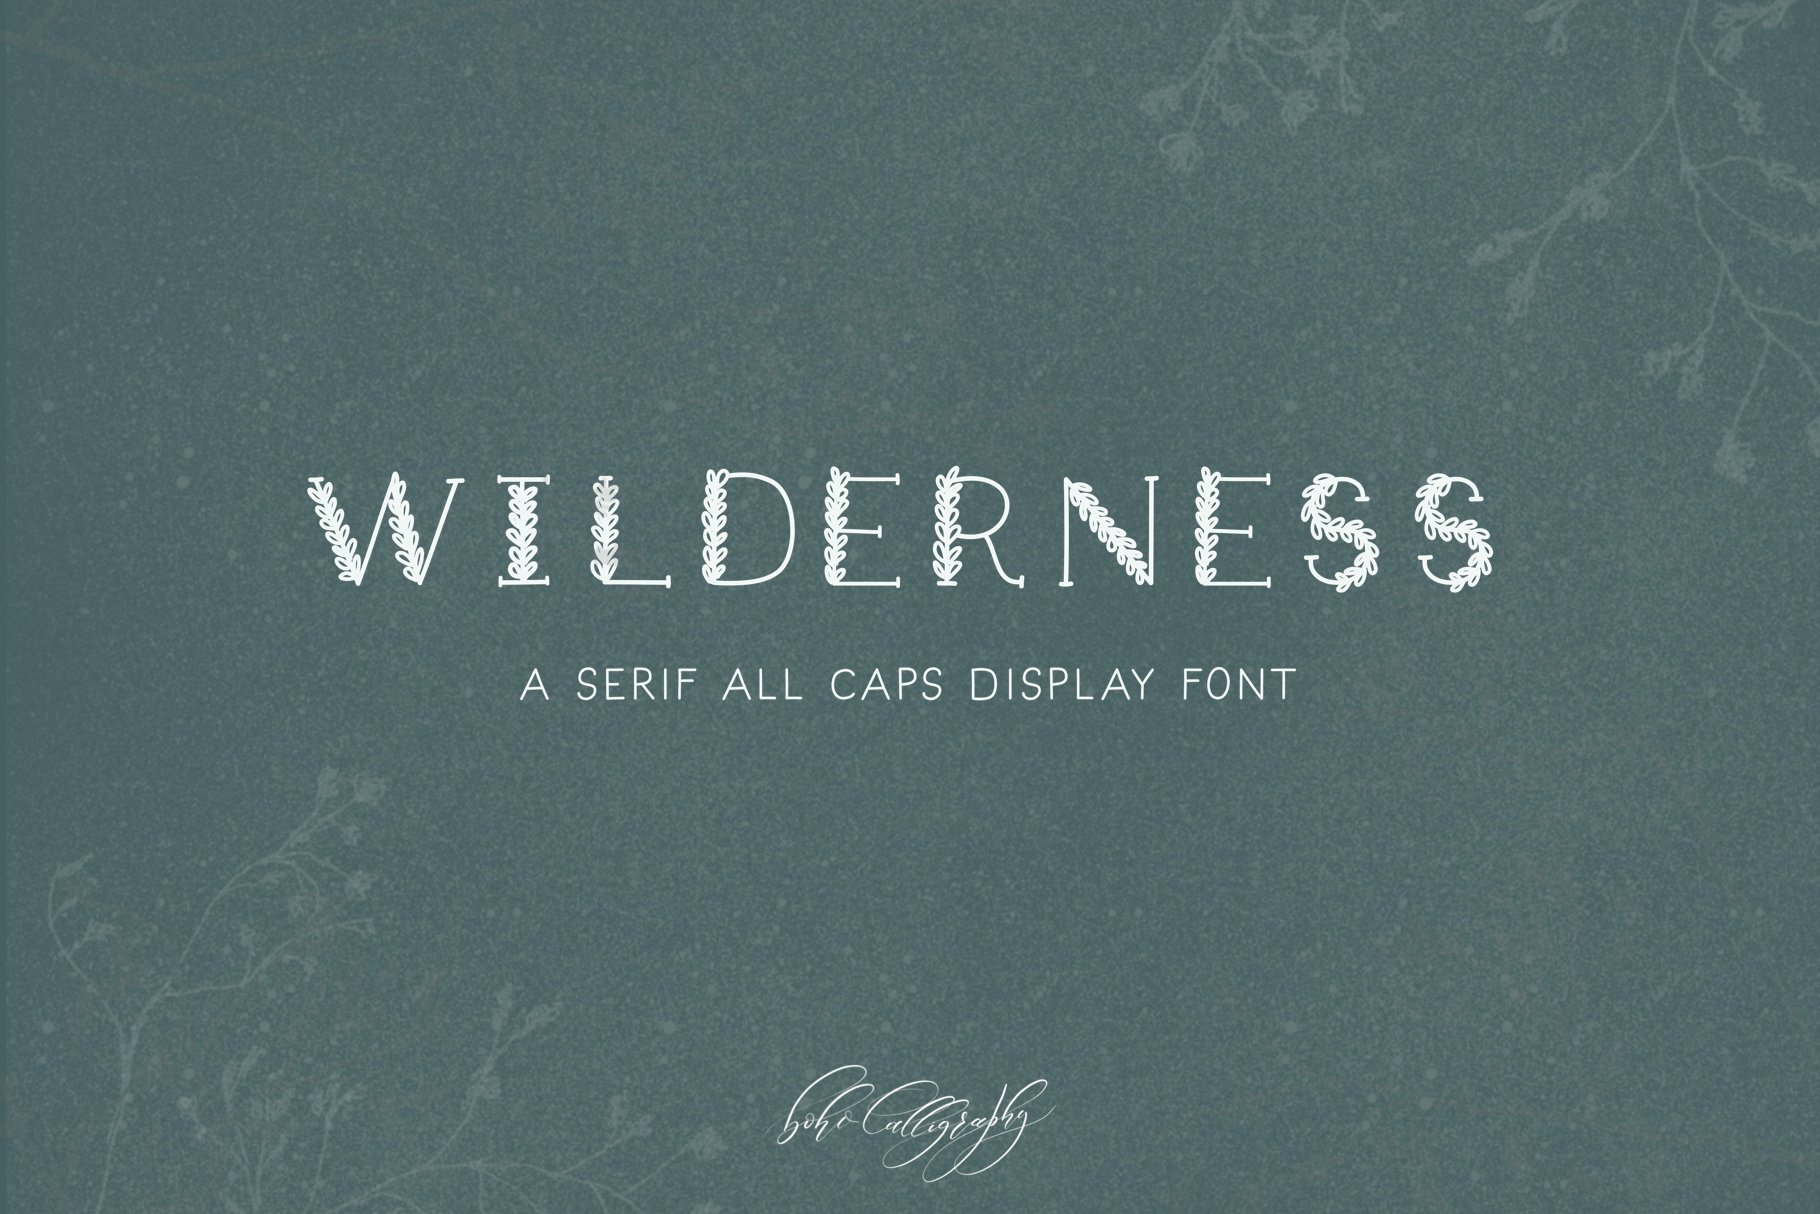 Wilderness - Serif Display Font cover image.